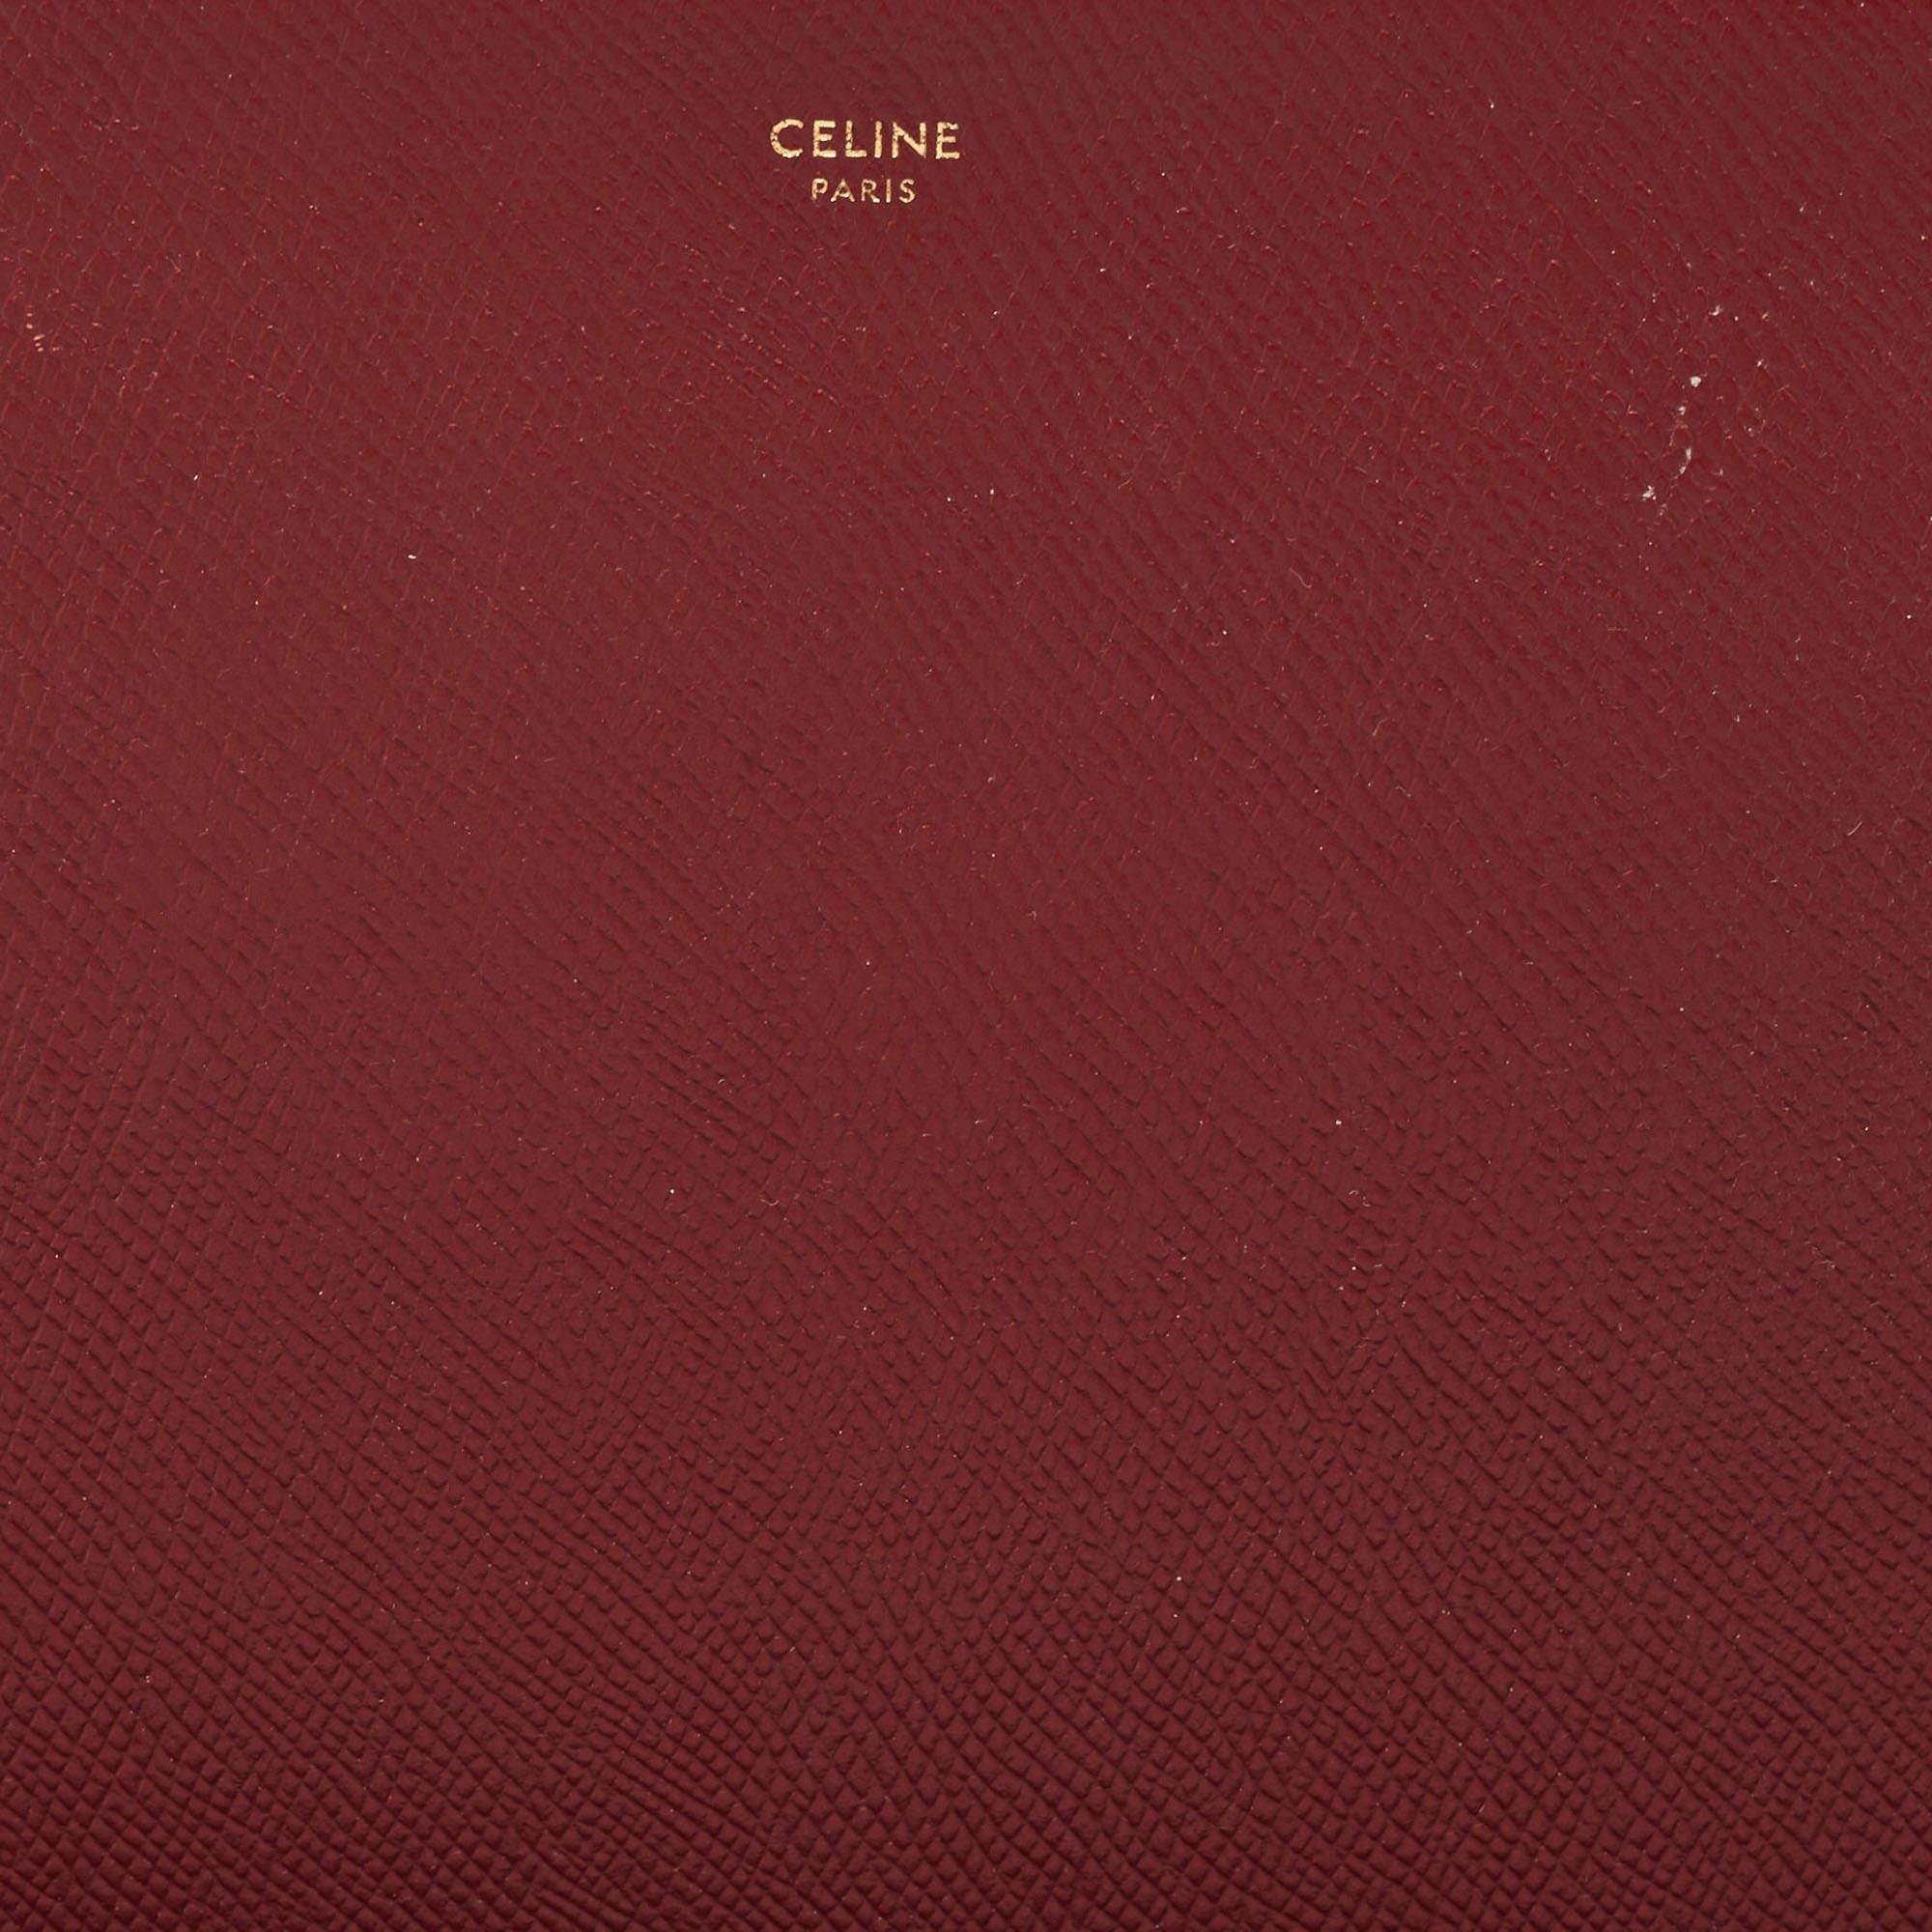 Celine Red Leather Zip Pouch 4